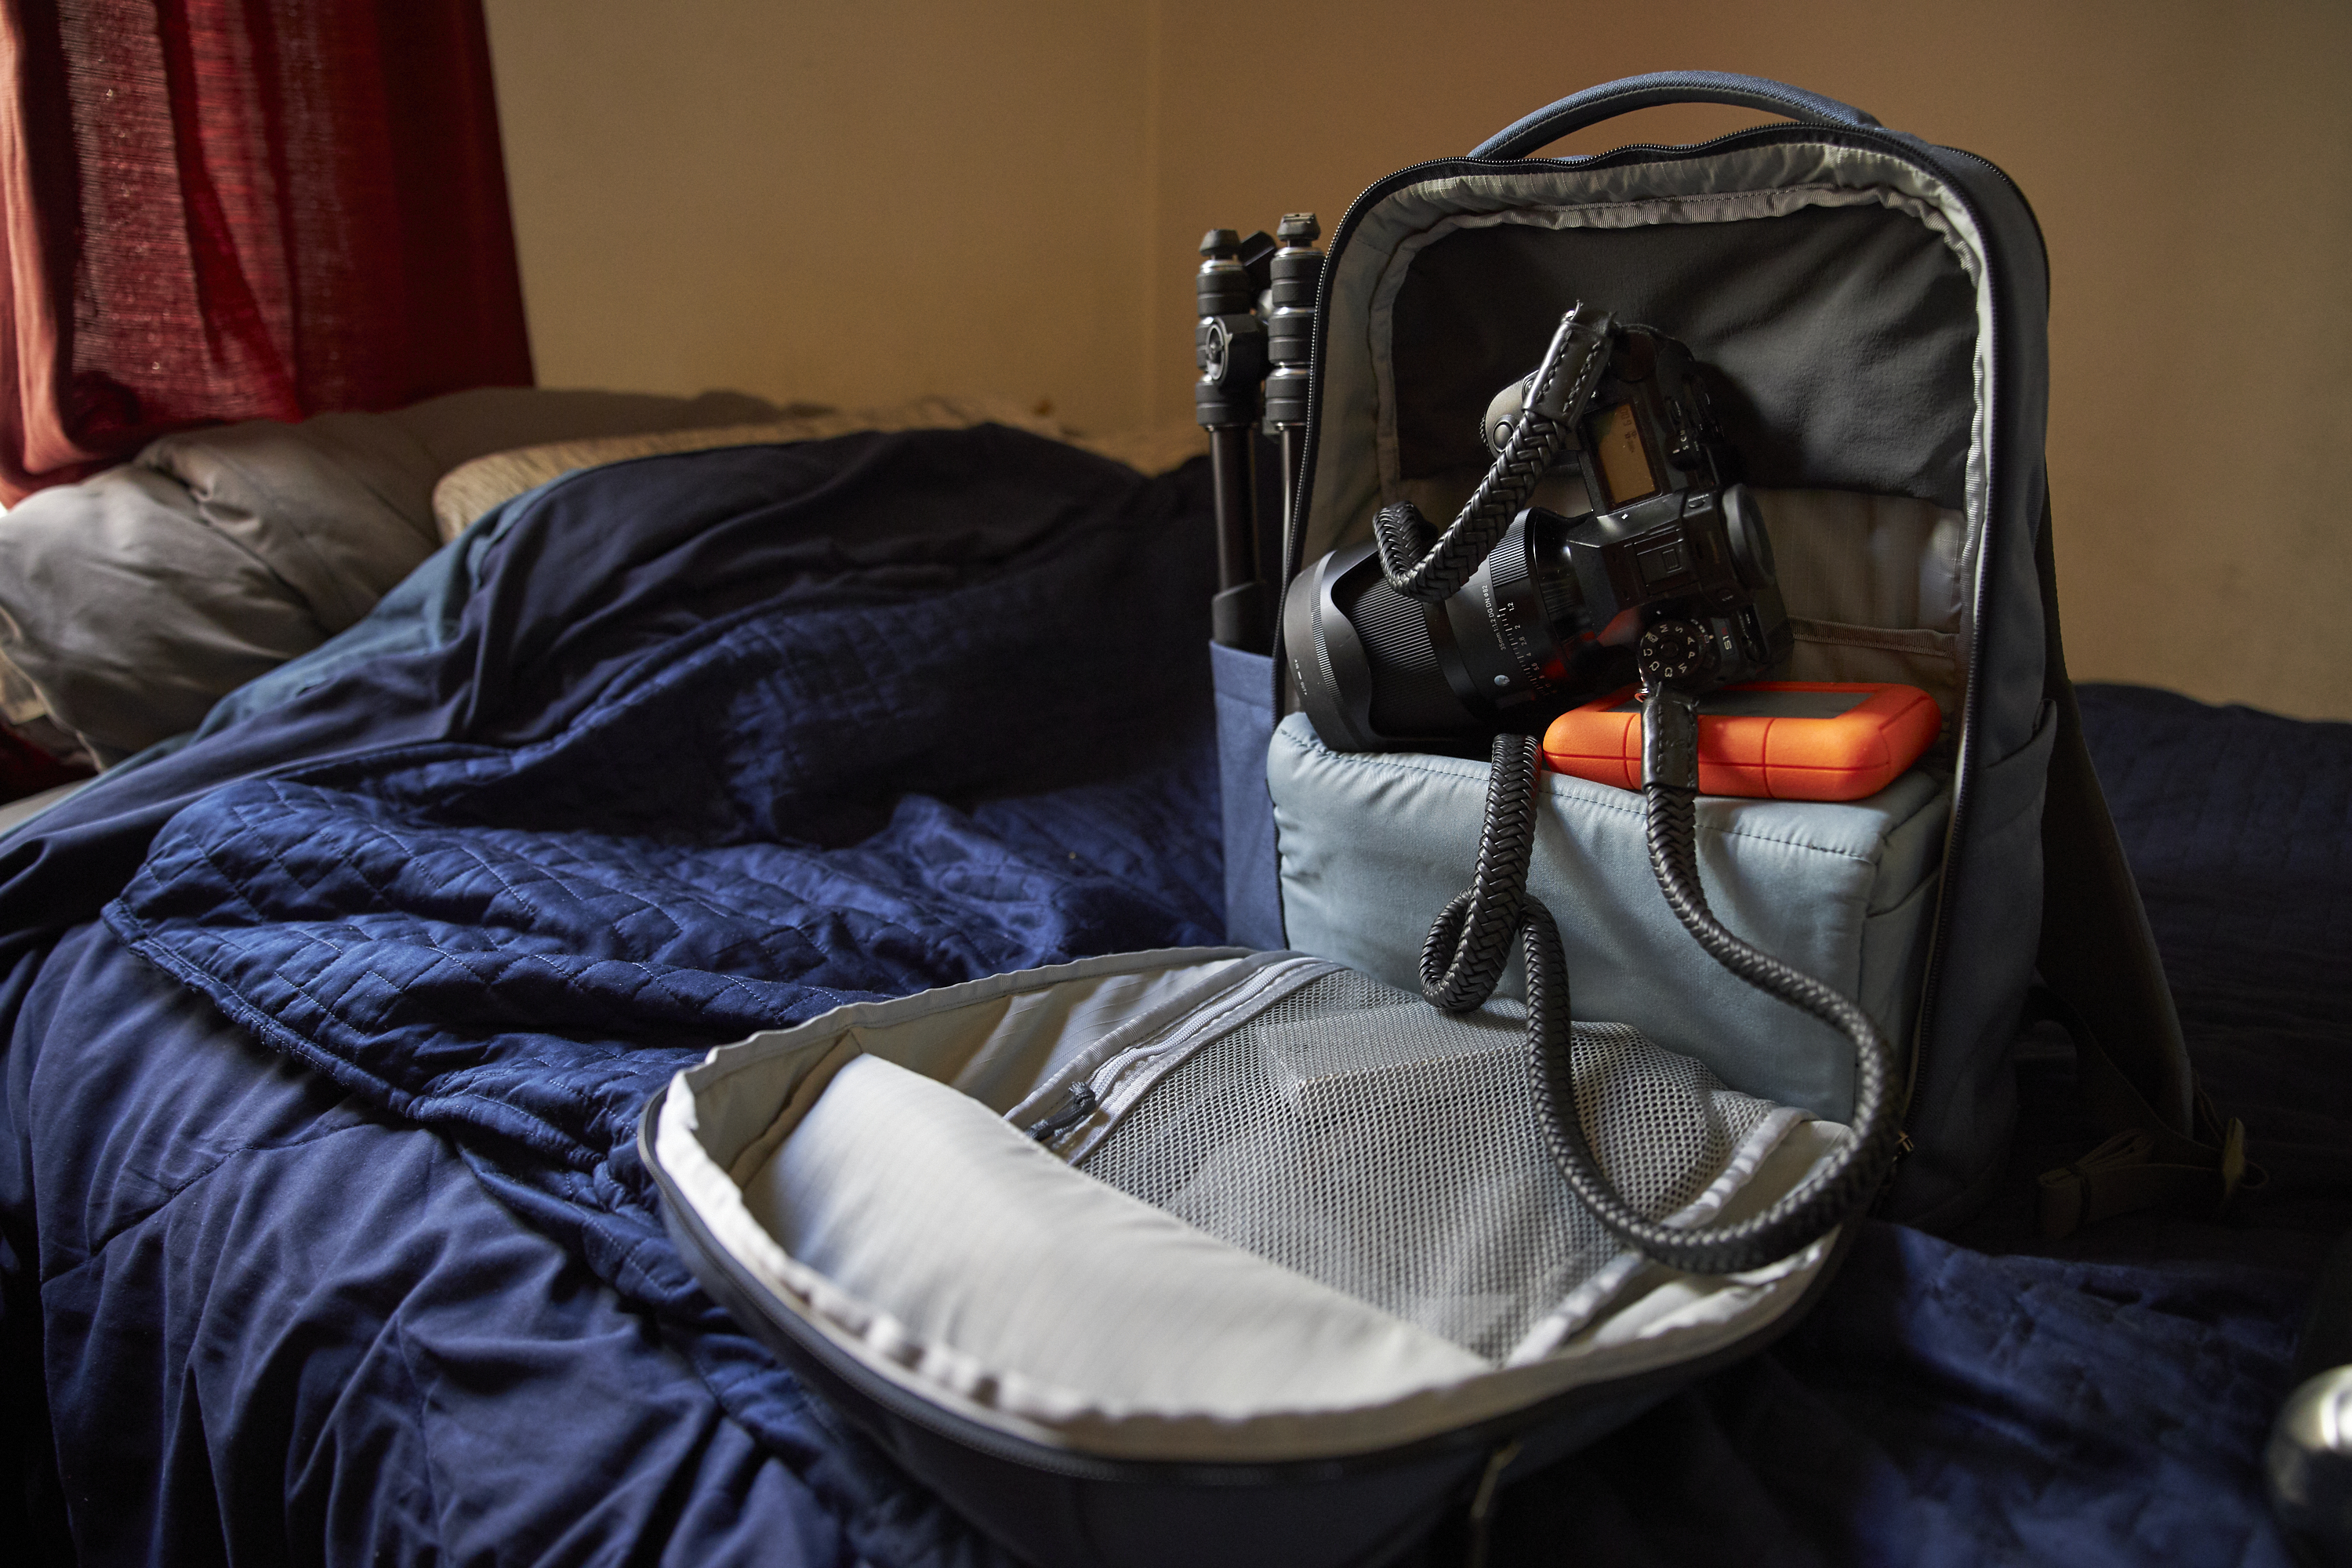 https://www.thephoblographer.com/wp-content/uploads/2019/10/Chris-Gampat-The-Phoblographer-Yeti-Crossroads-Backpack-23-review-product-Images-2.81-50s1600-10.jpg